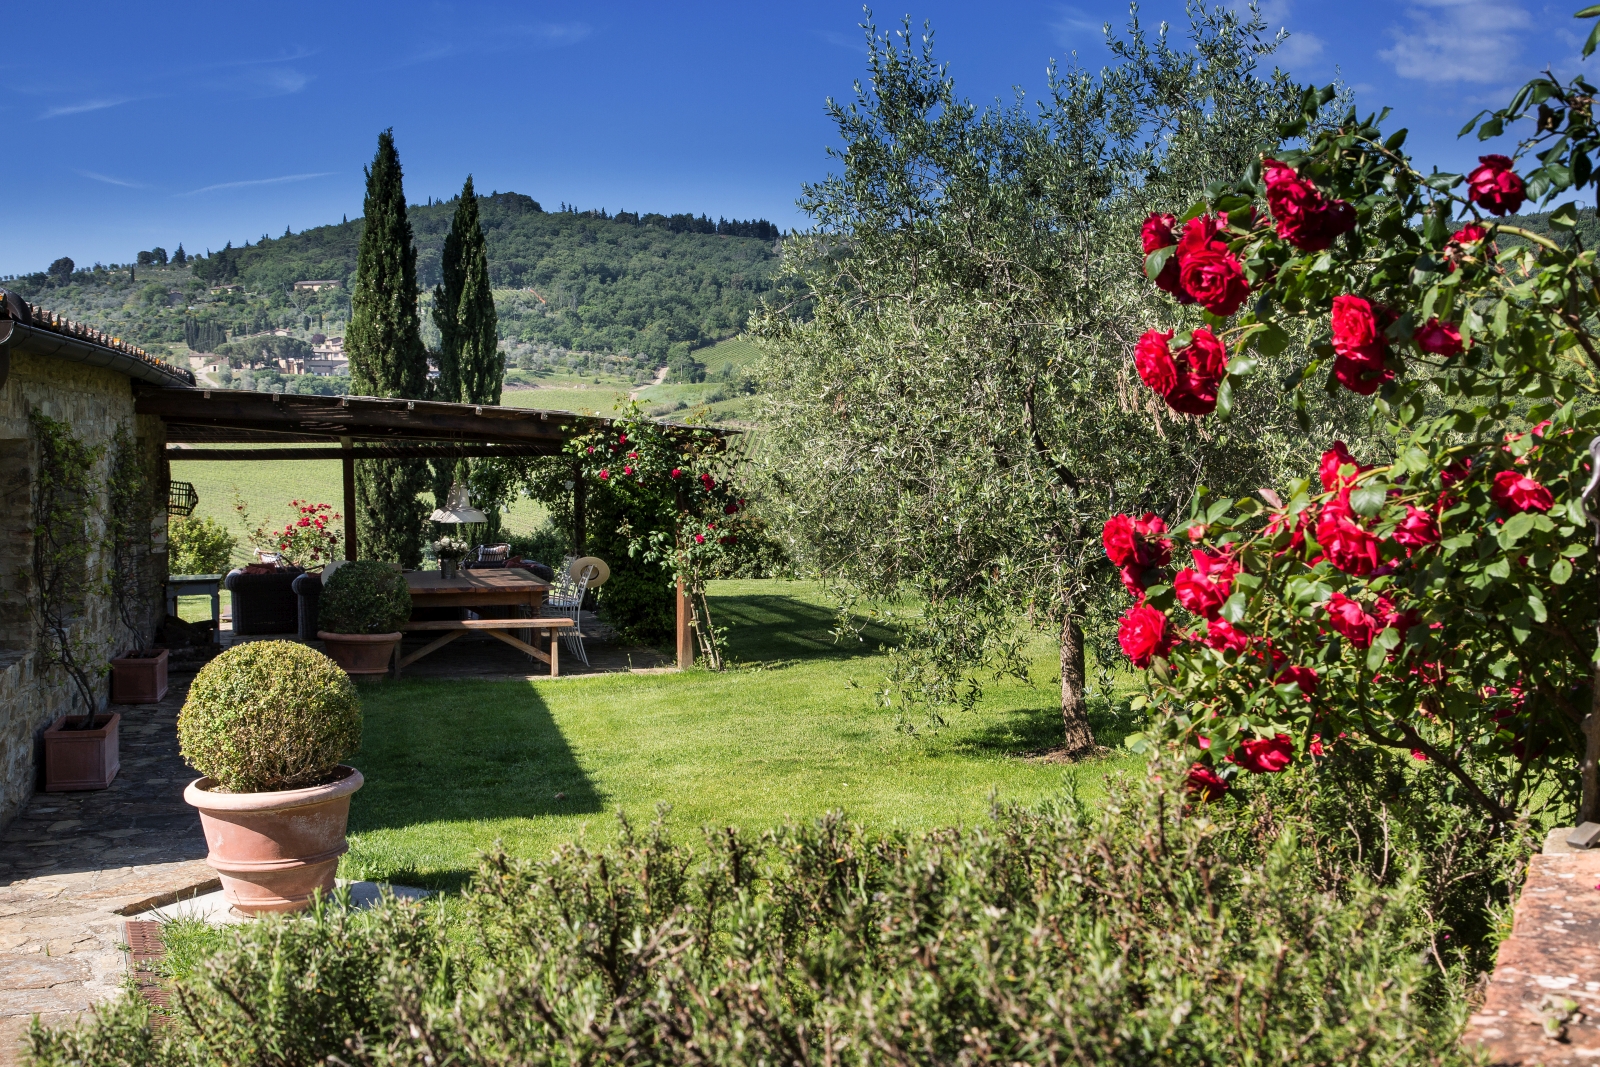 Garden with plants, flowers, covered terrace and view of countryside at Il Prato di Vignamaggio in Tuscany, Italy